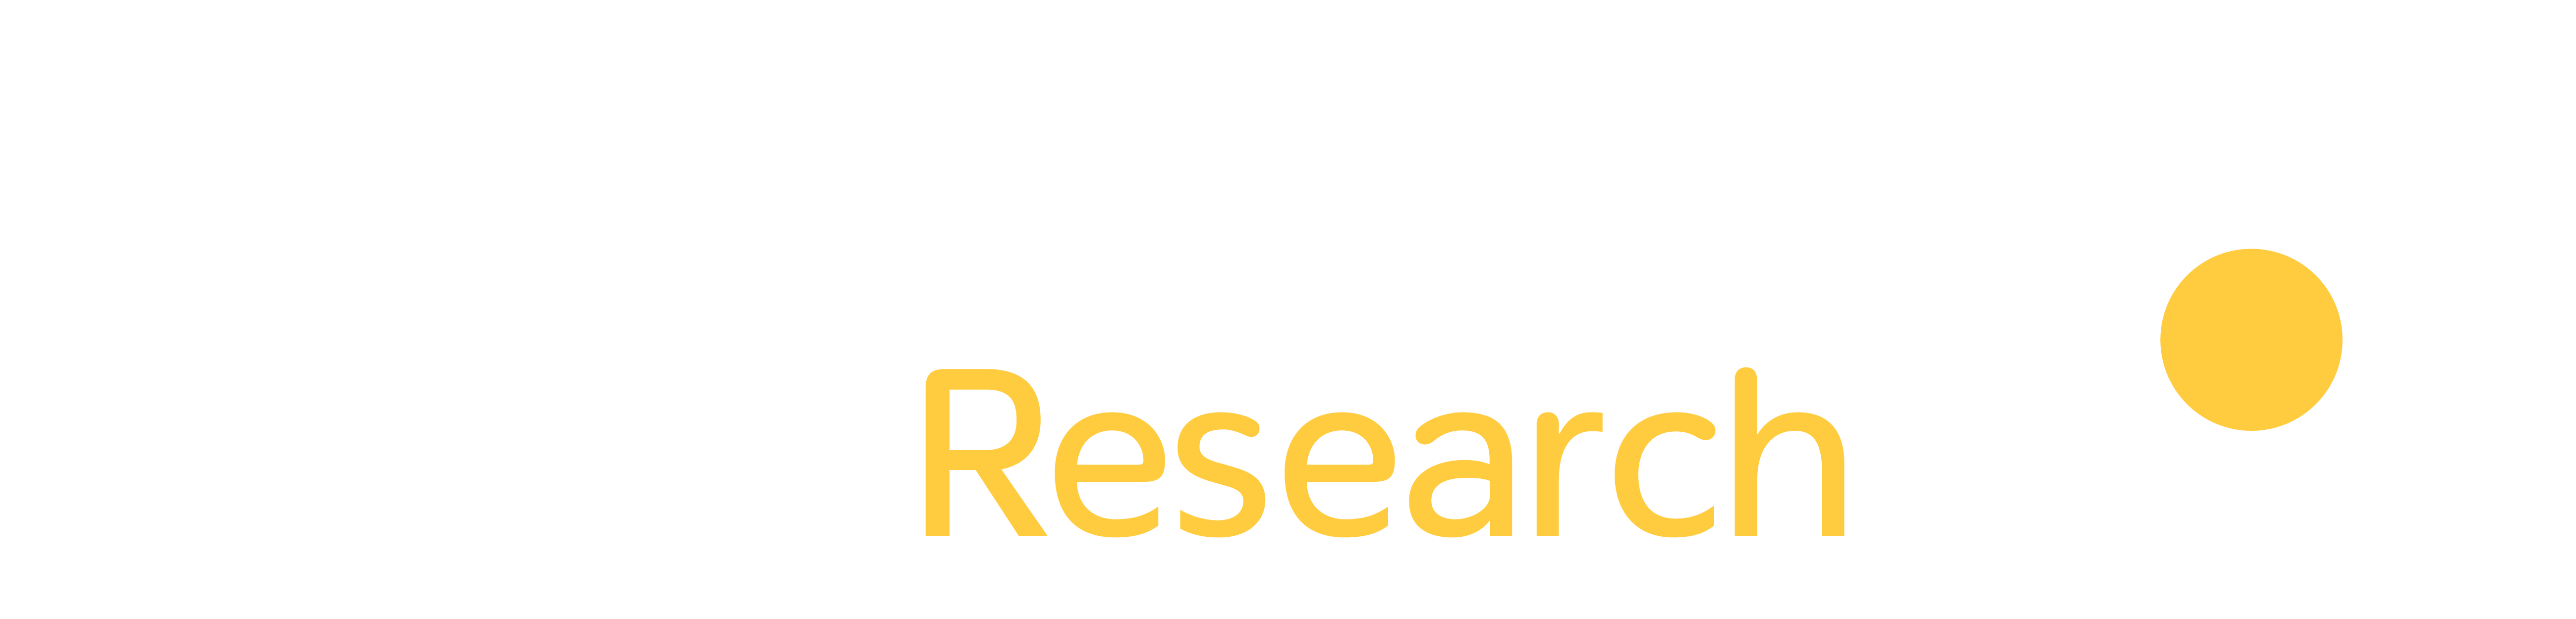 Yorkshire Cancer Research